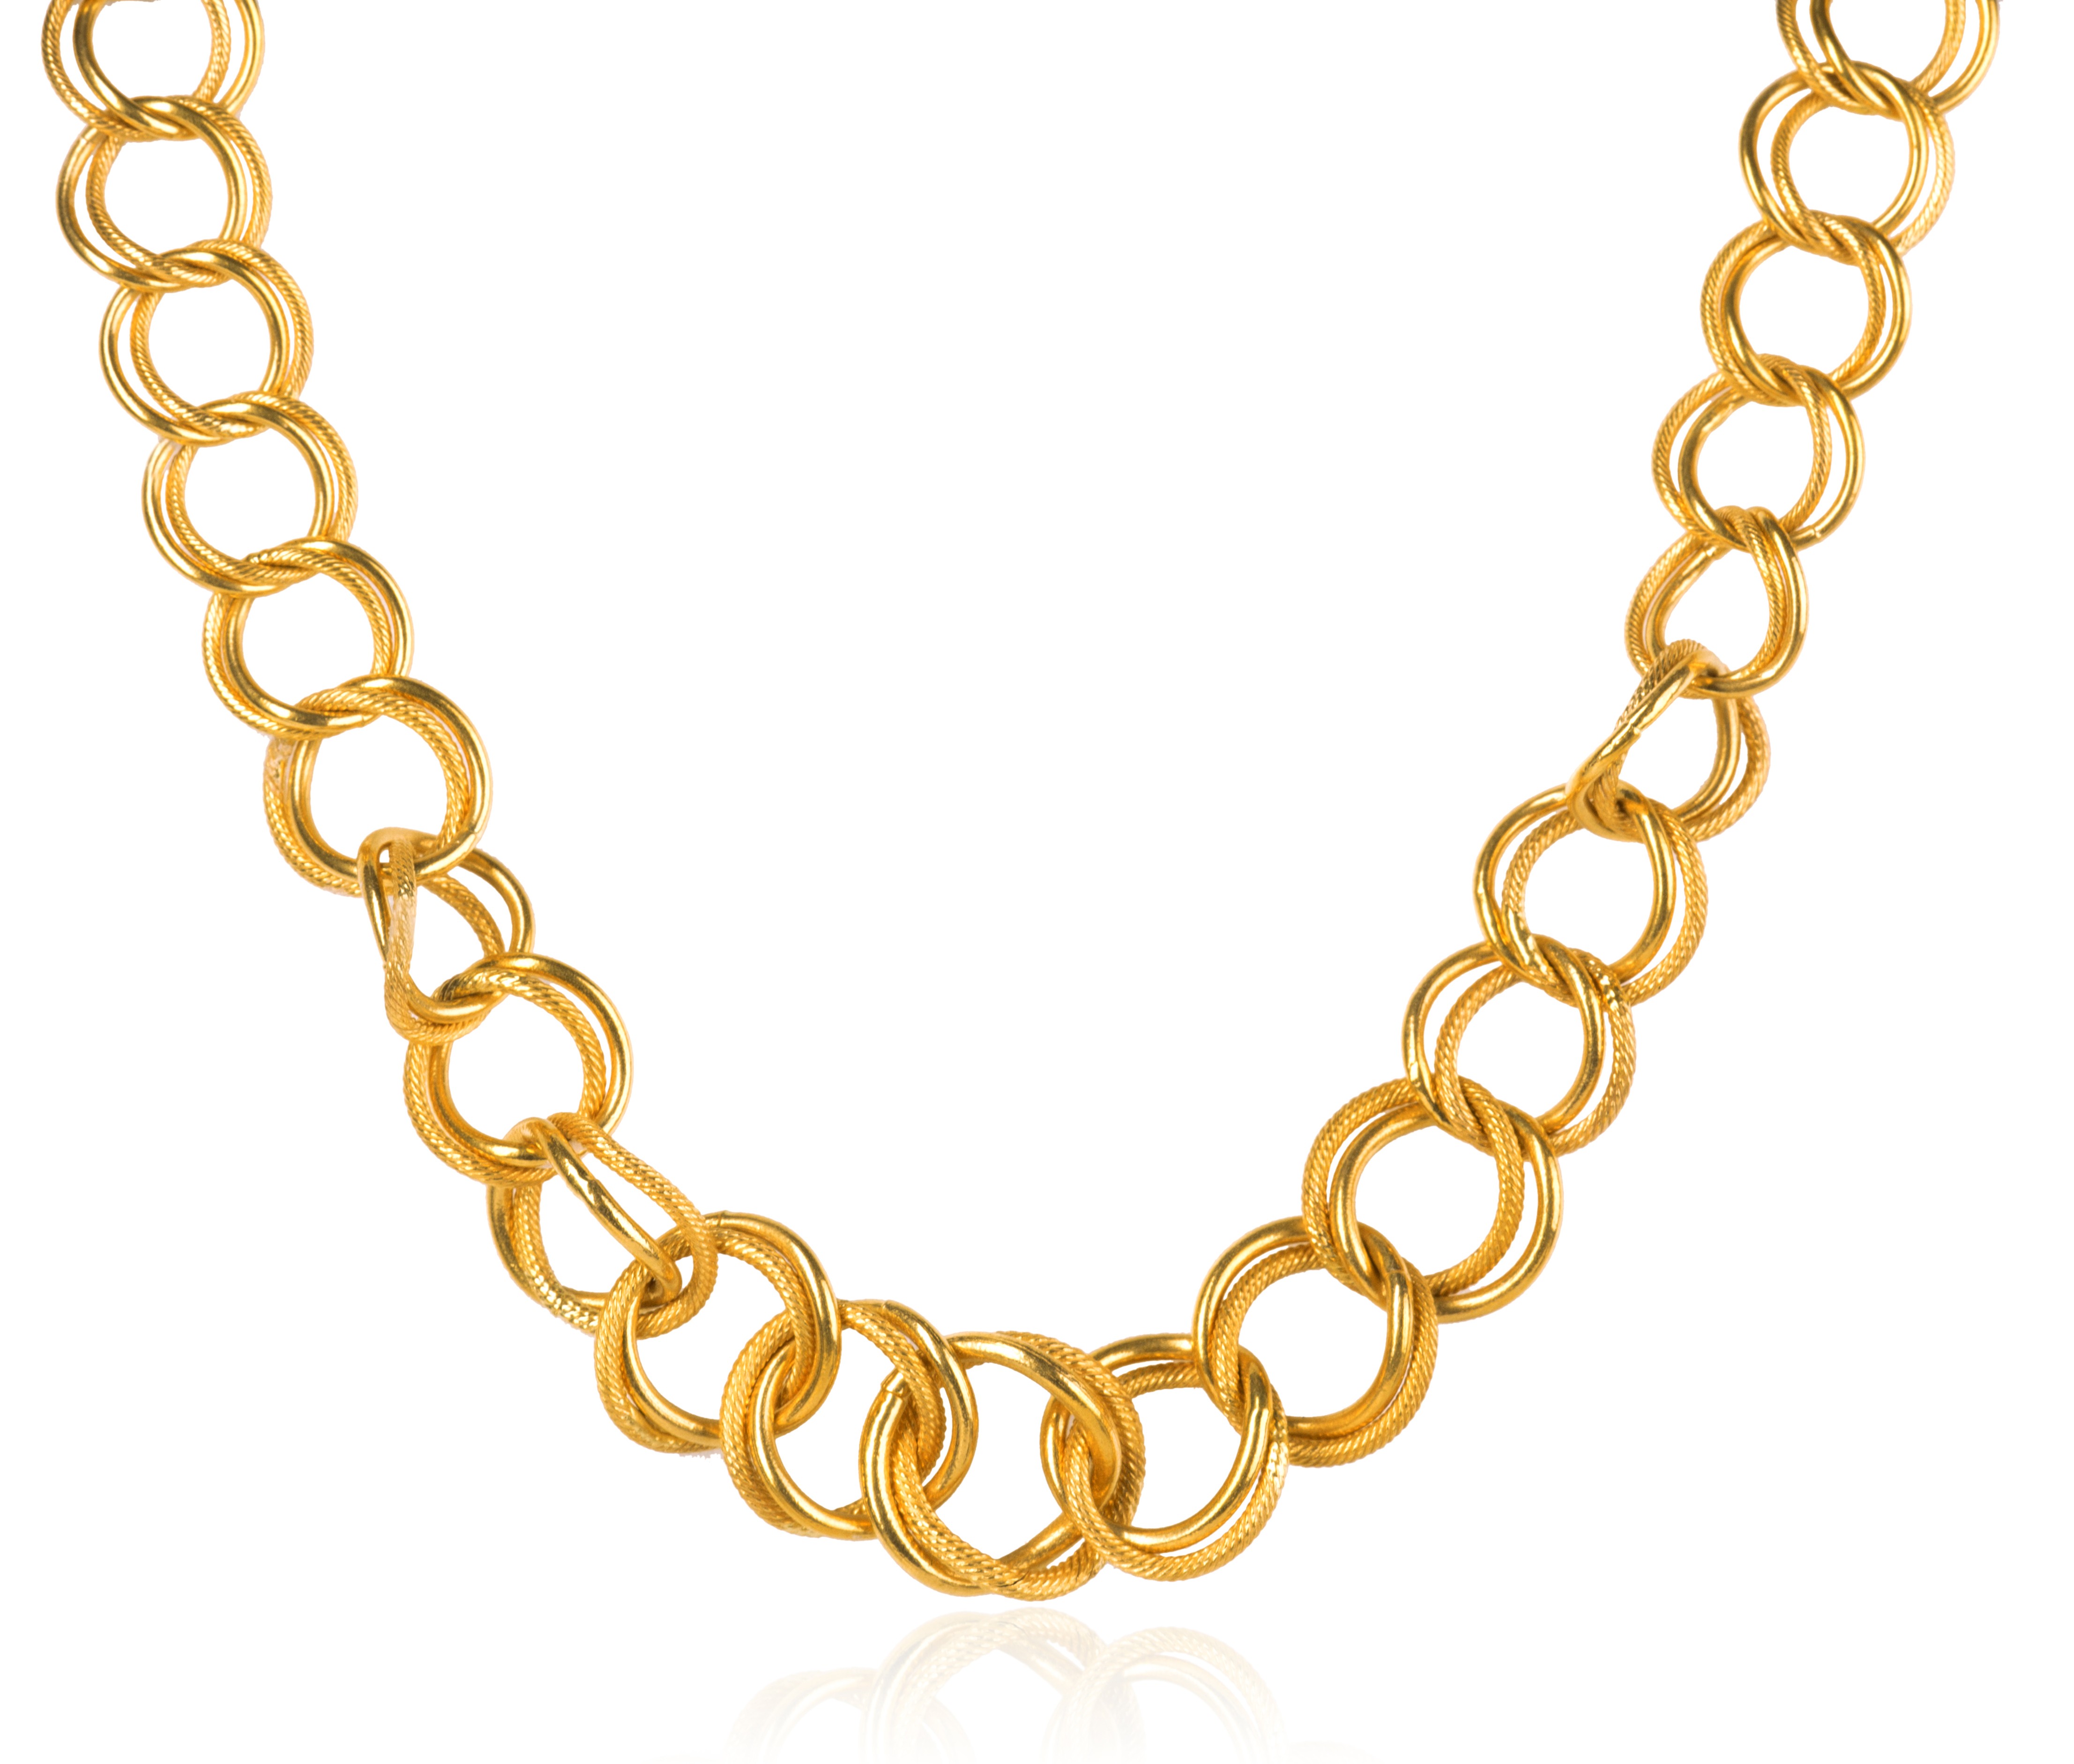 Loop Gold Necklace - Necklace - Jewellery